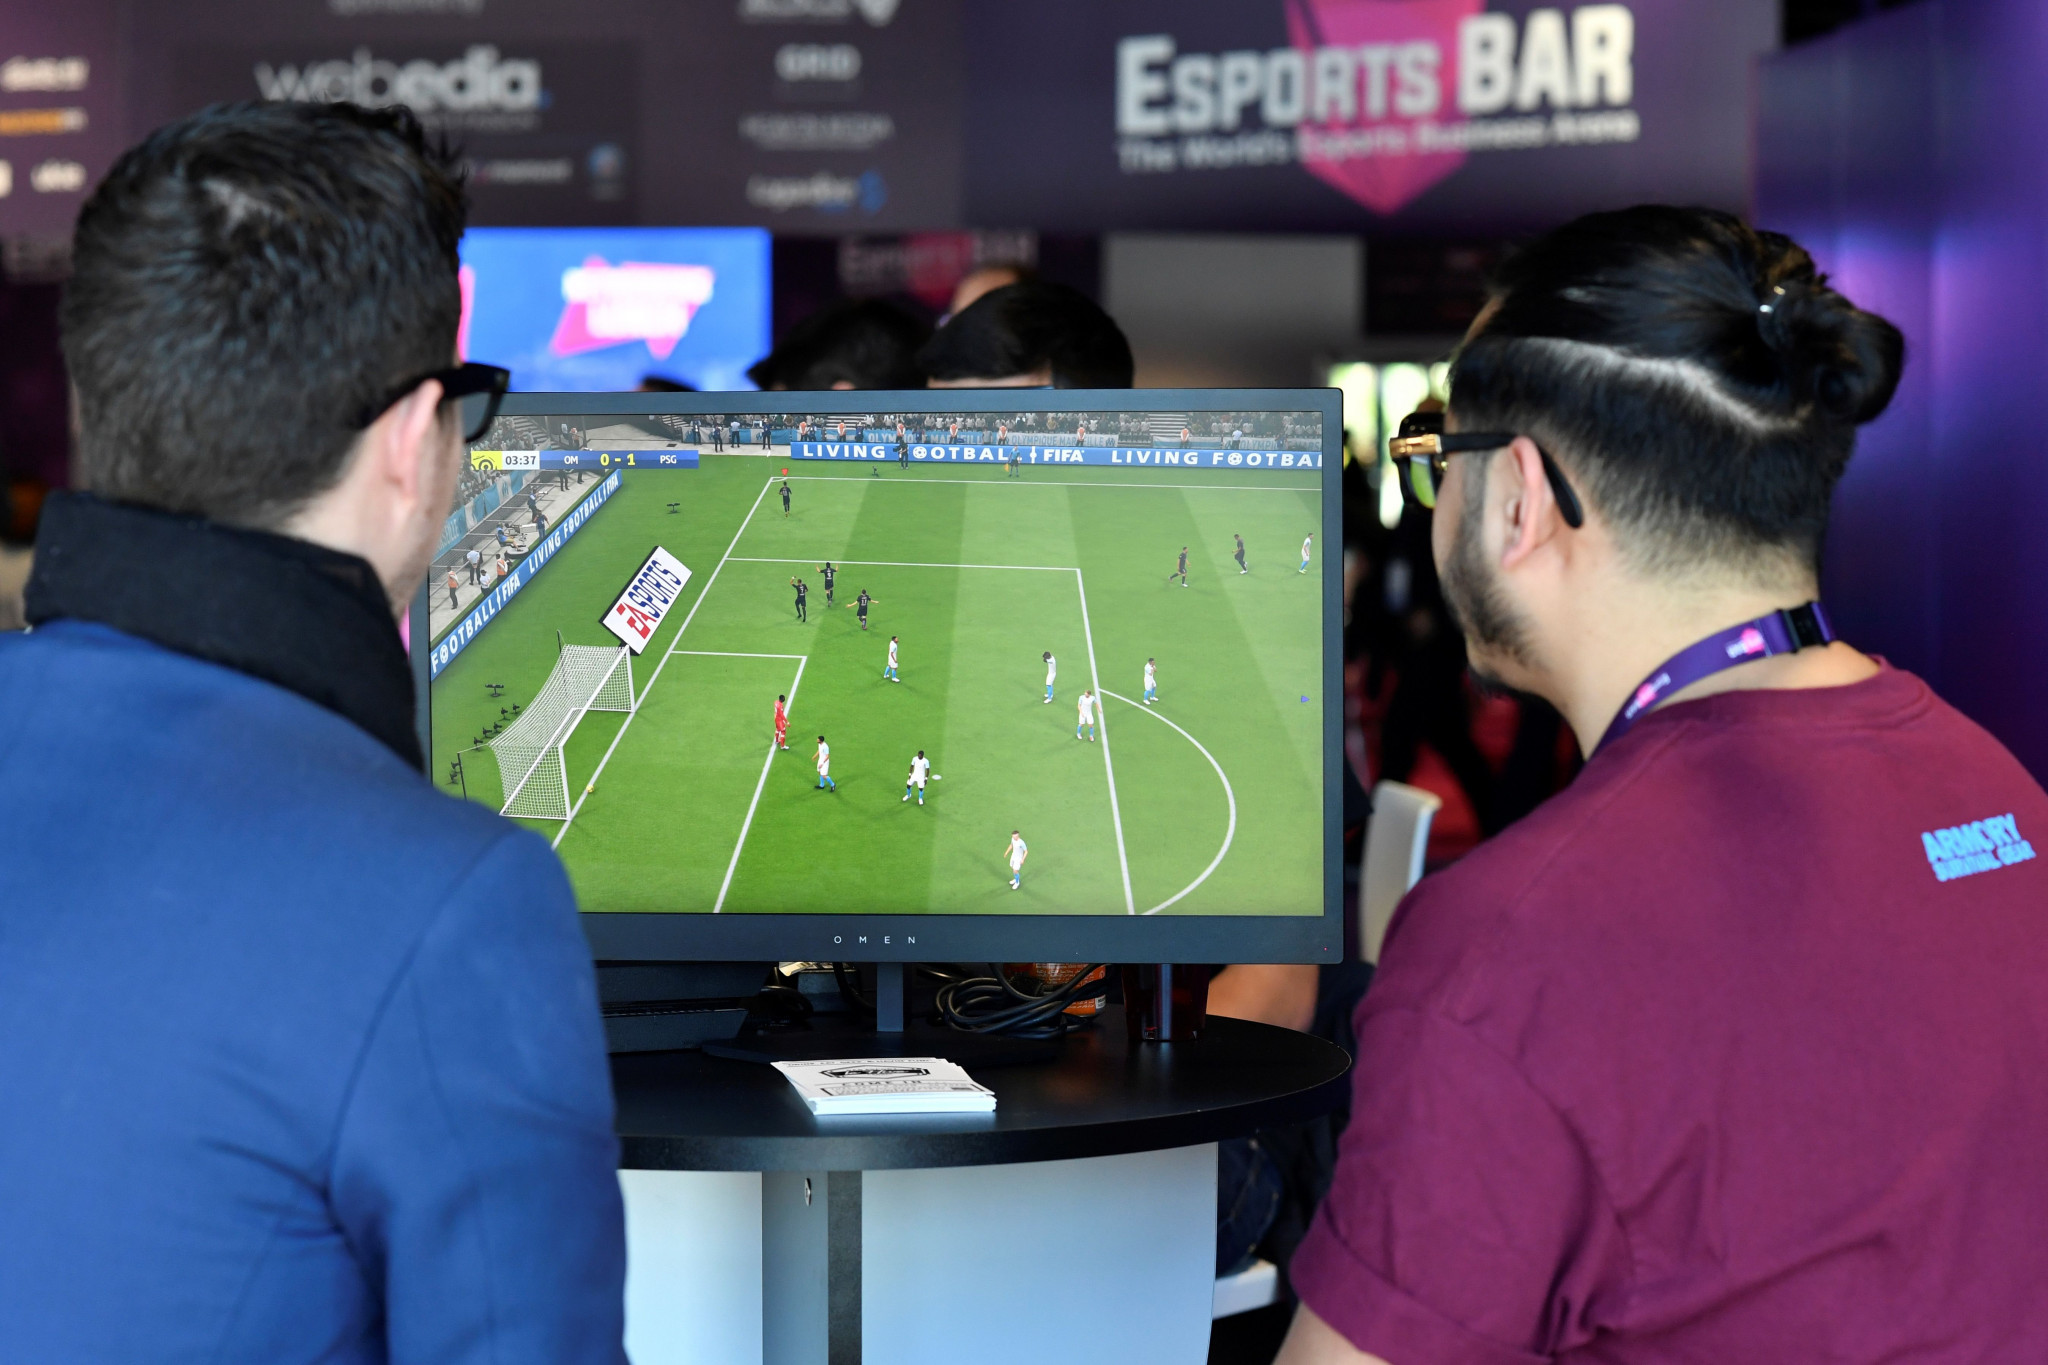 Sixteen competitors will battle it out in a FIFA 19 tournament as part of the Minsk 2019 European Games cultural programme ©Getty Images